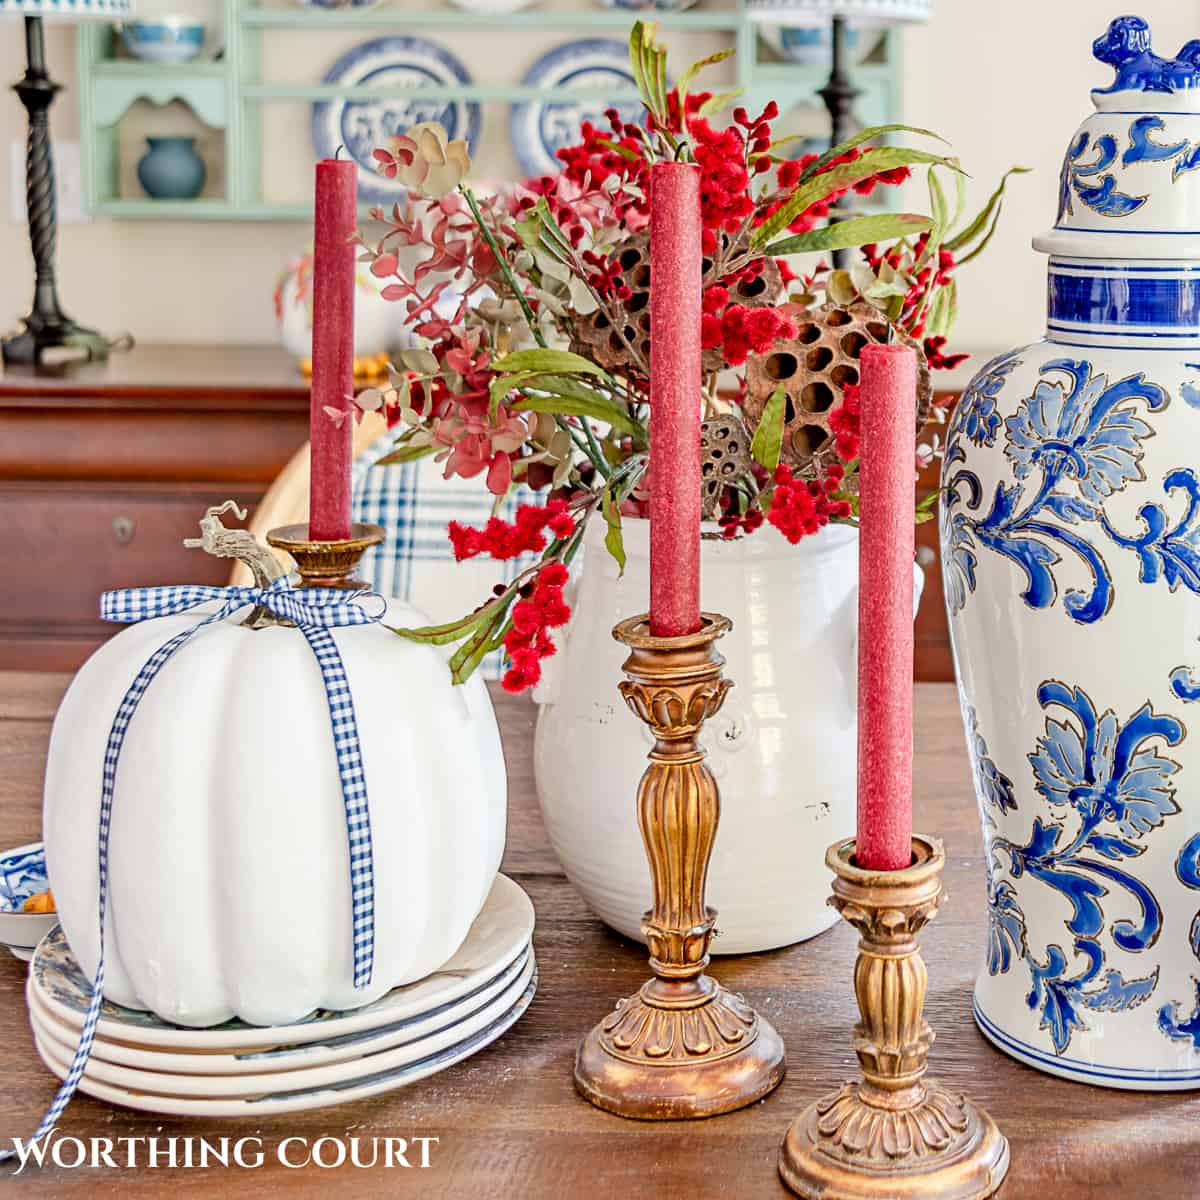 fall centerpiece using blue and white accessories, a white pumpkin, fall colored florals and burgundy candles in gold candle holders